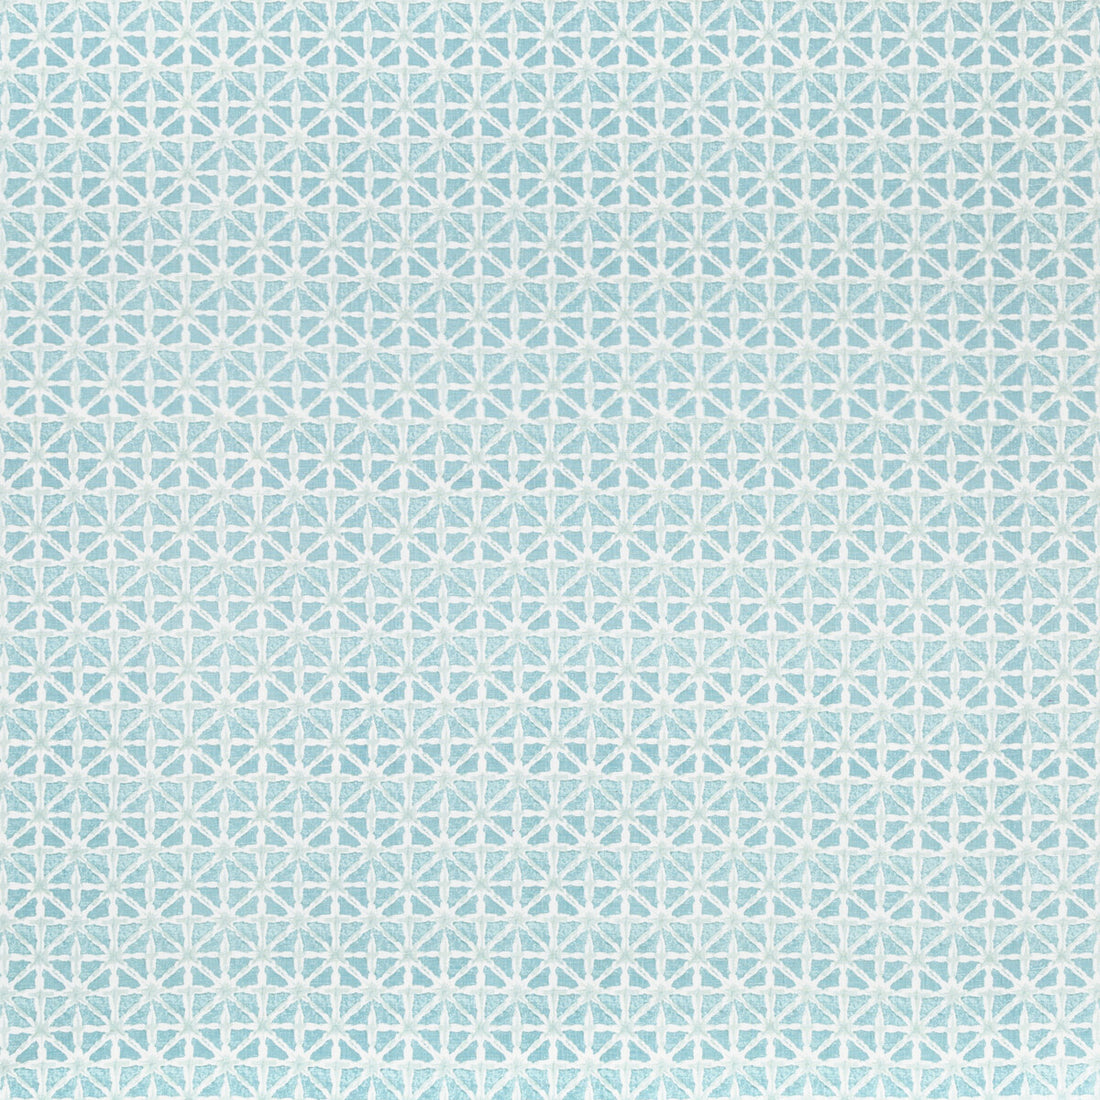 Sylvan Print fabric in aqua color - pattern 2020183.13.0 - by Lee Jofa in the Avondale collection